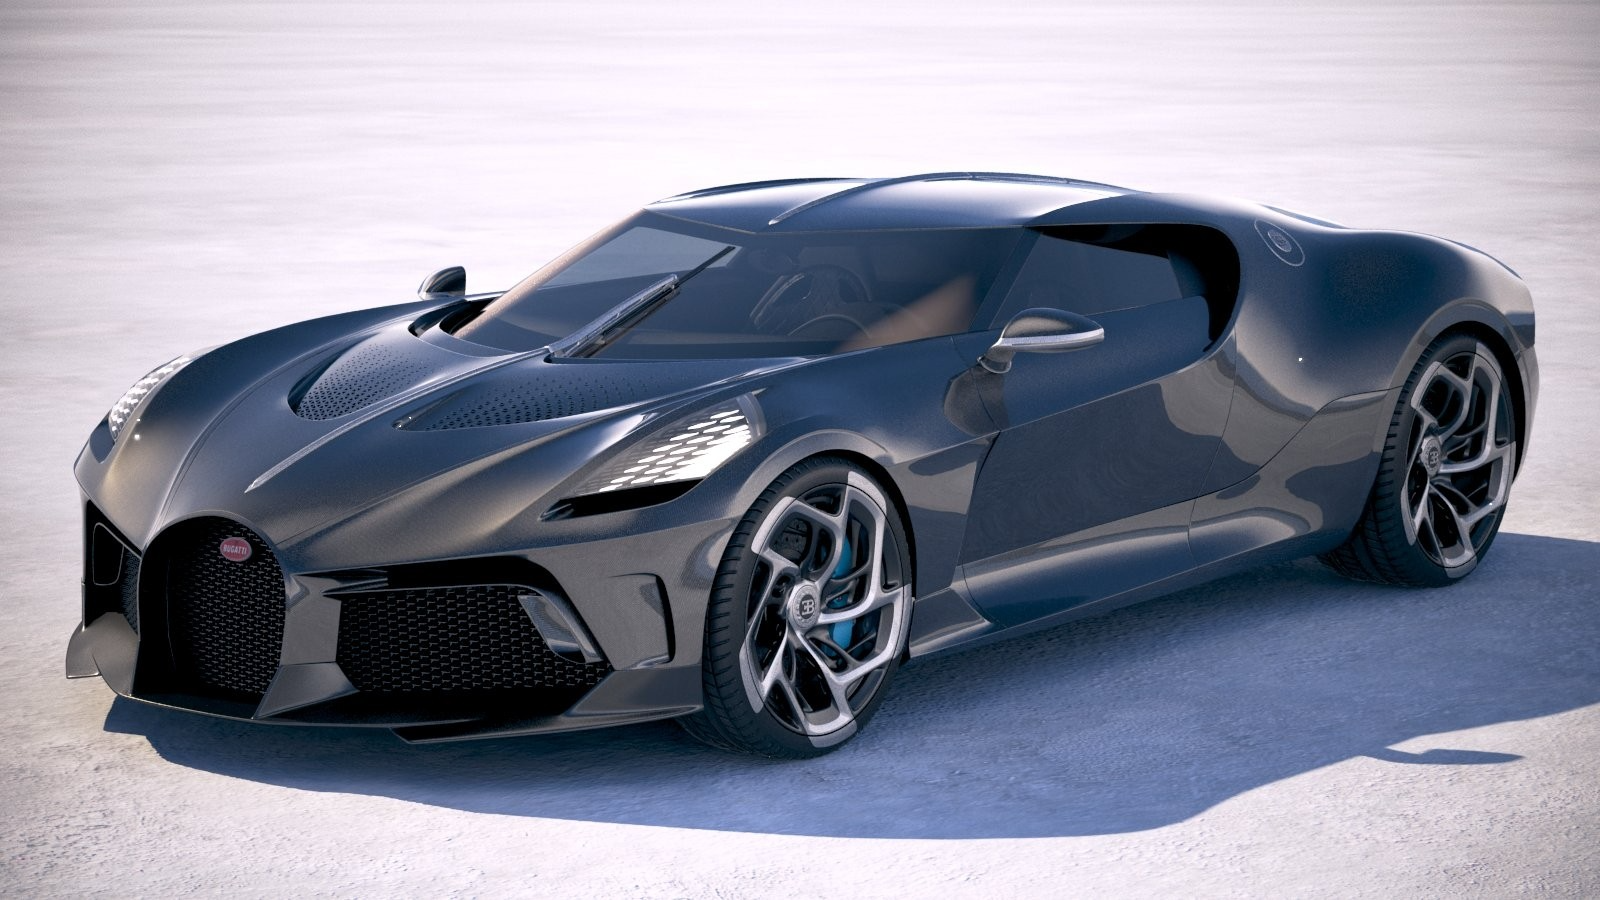 Top 20 Most Expensive Cars In The World - Of All Time